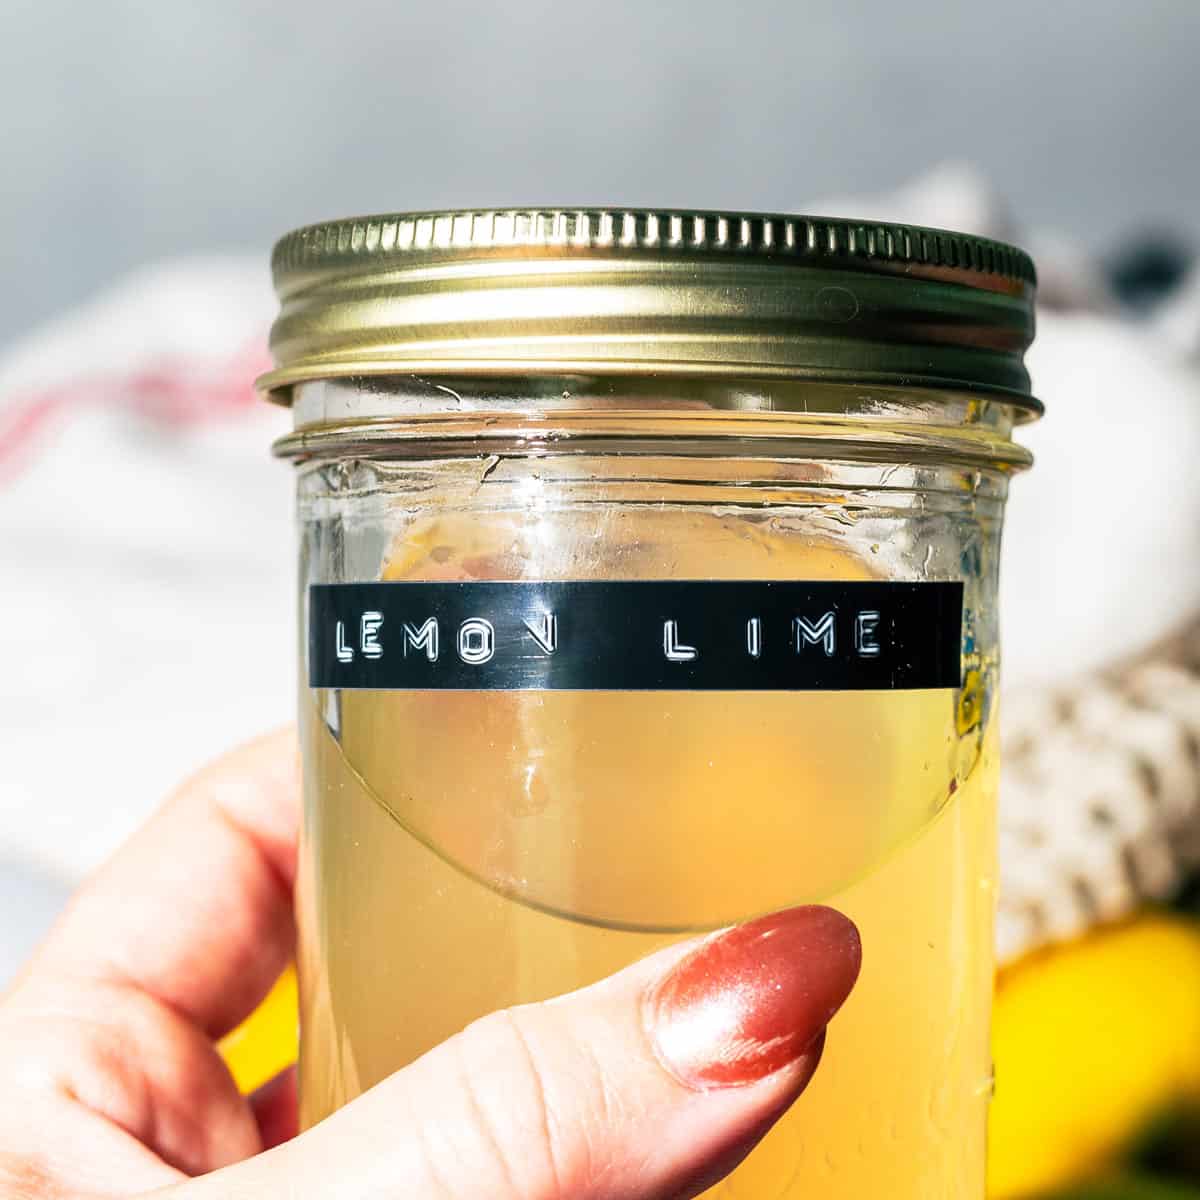 Someone holding the jar of syrup that is labeled with words "lemon lime".